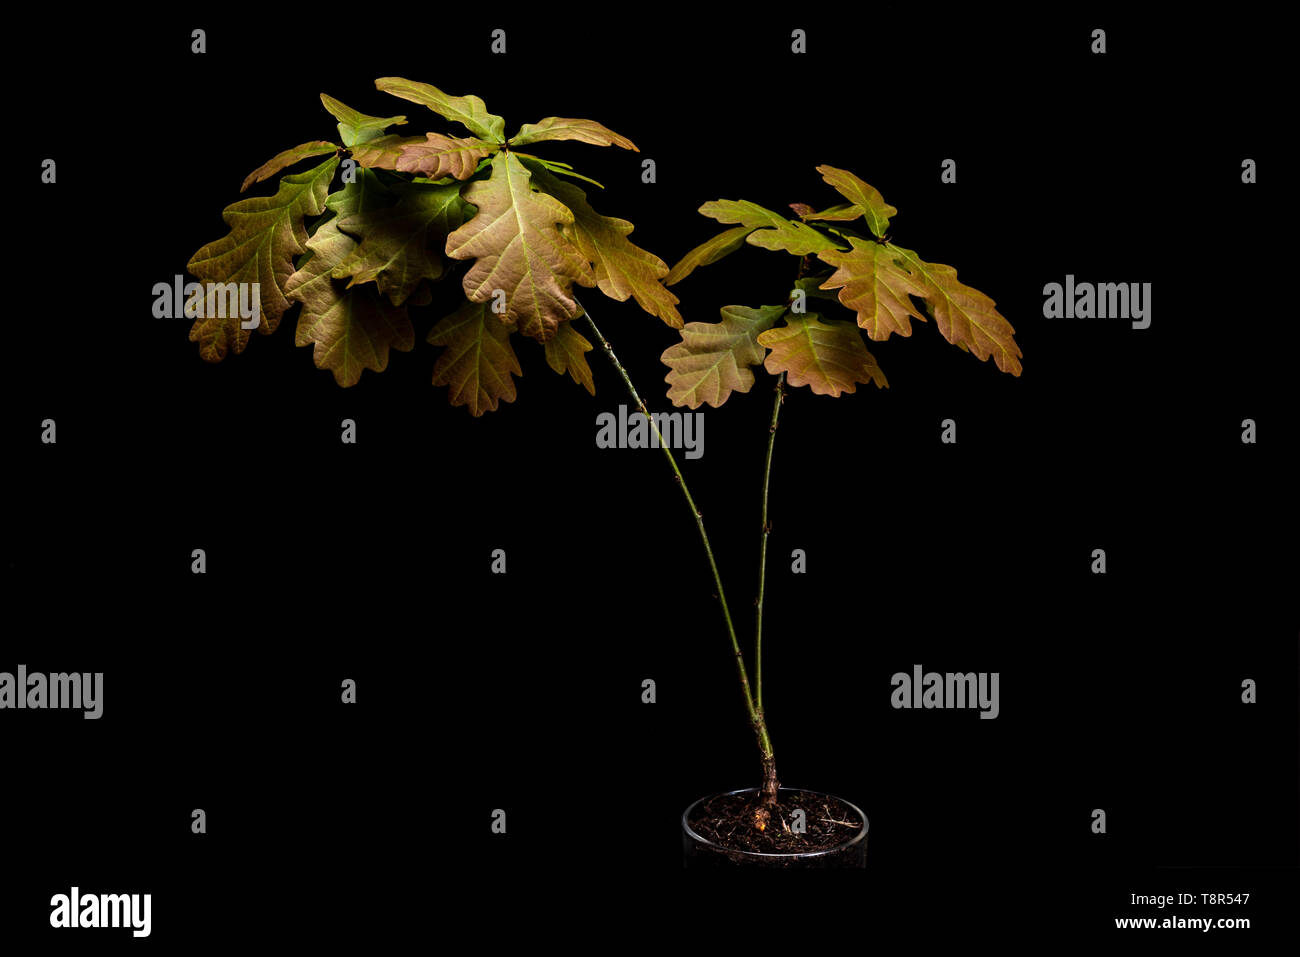 Low key life science image of english oak seedling. Black background quercus robur sapling, young plant. Stock Photo